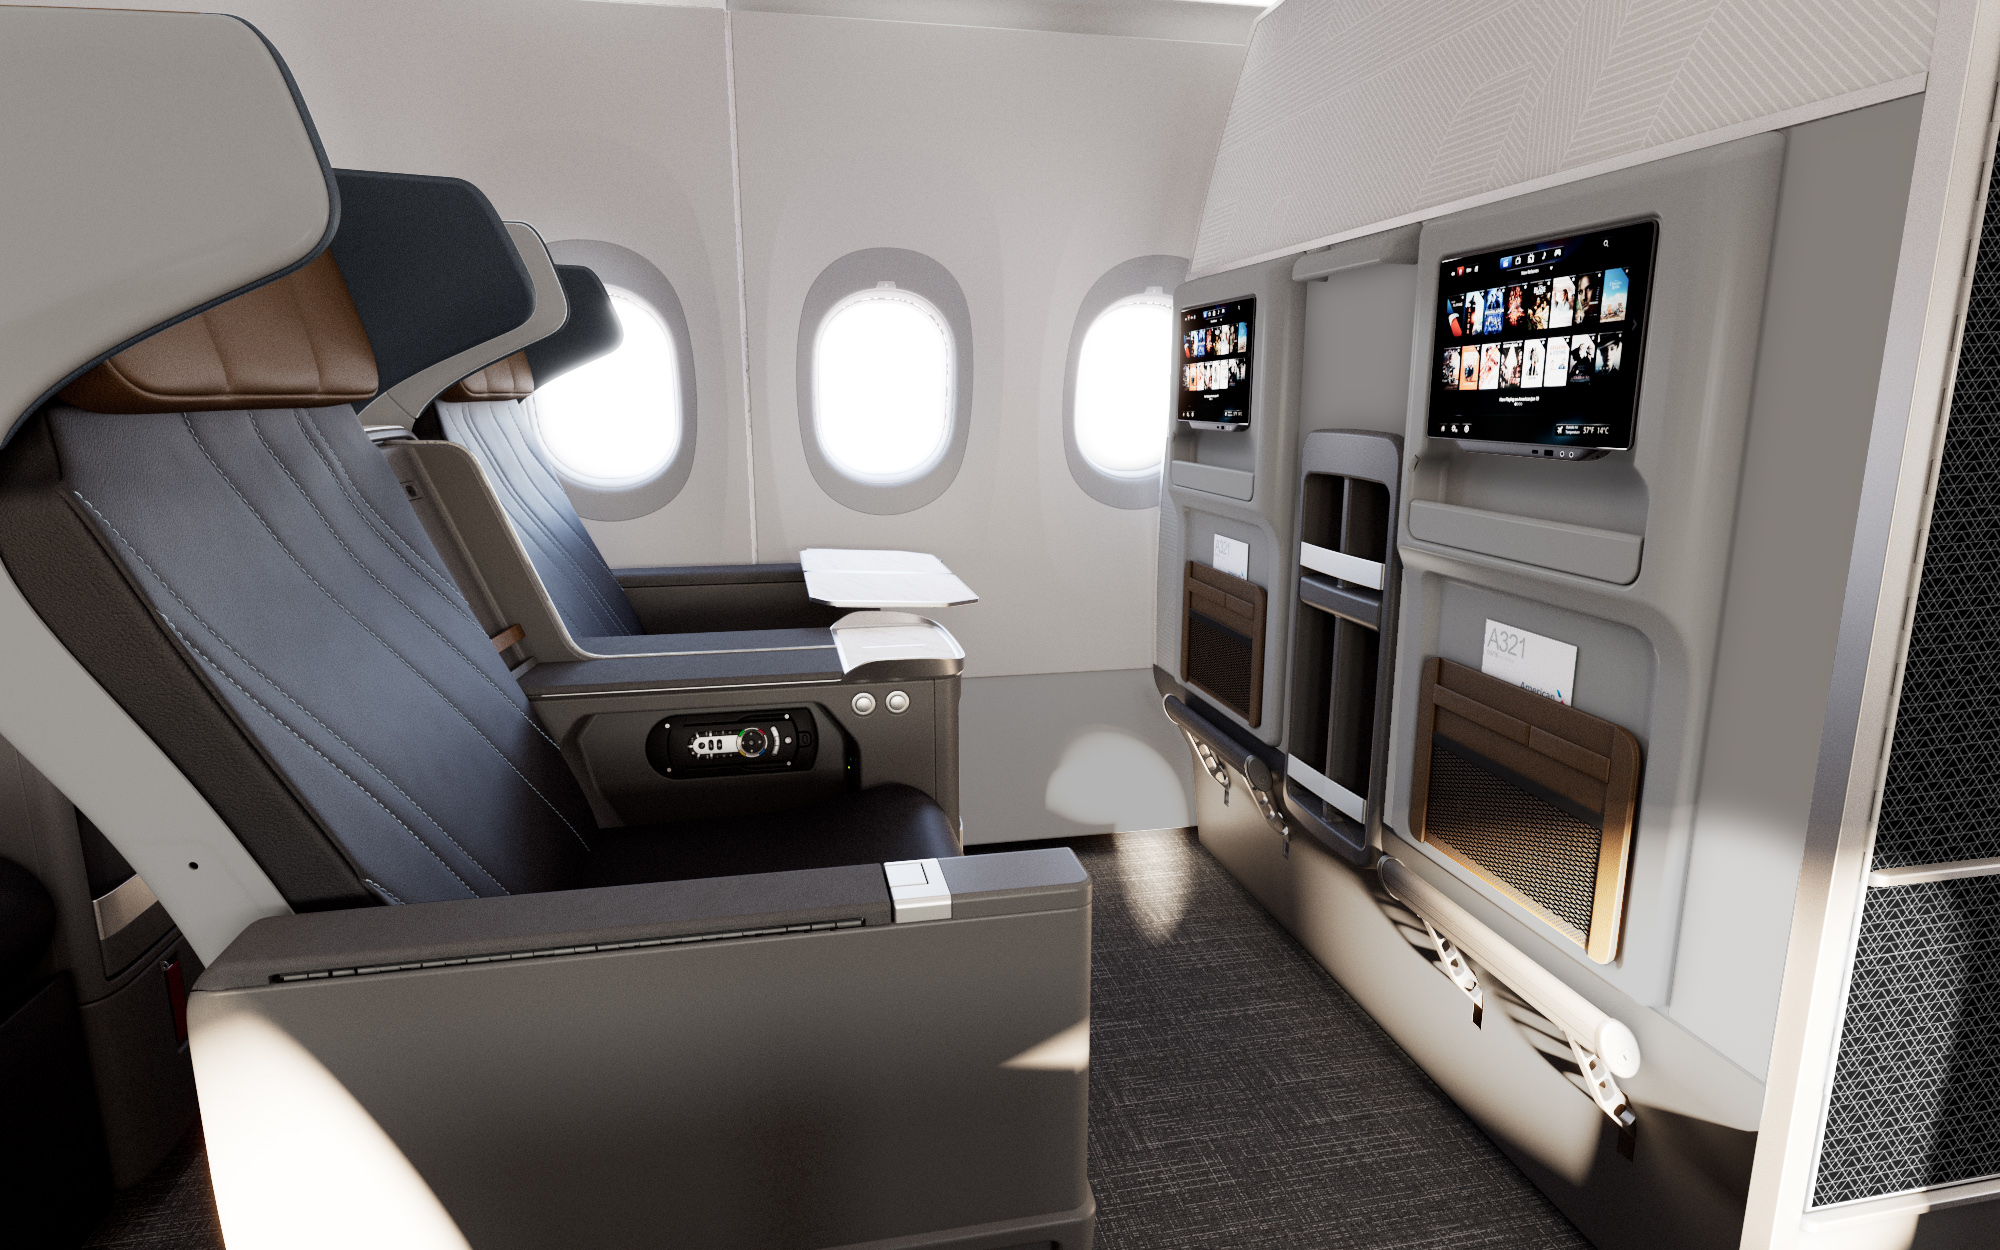 A Private Premium Experience In The Sky American Airlines Introduces New Flagship Suite Seats Newsroom